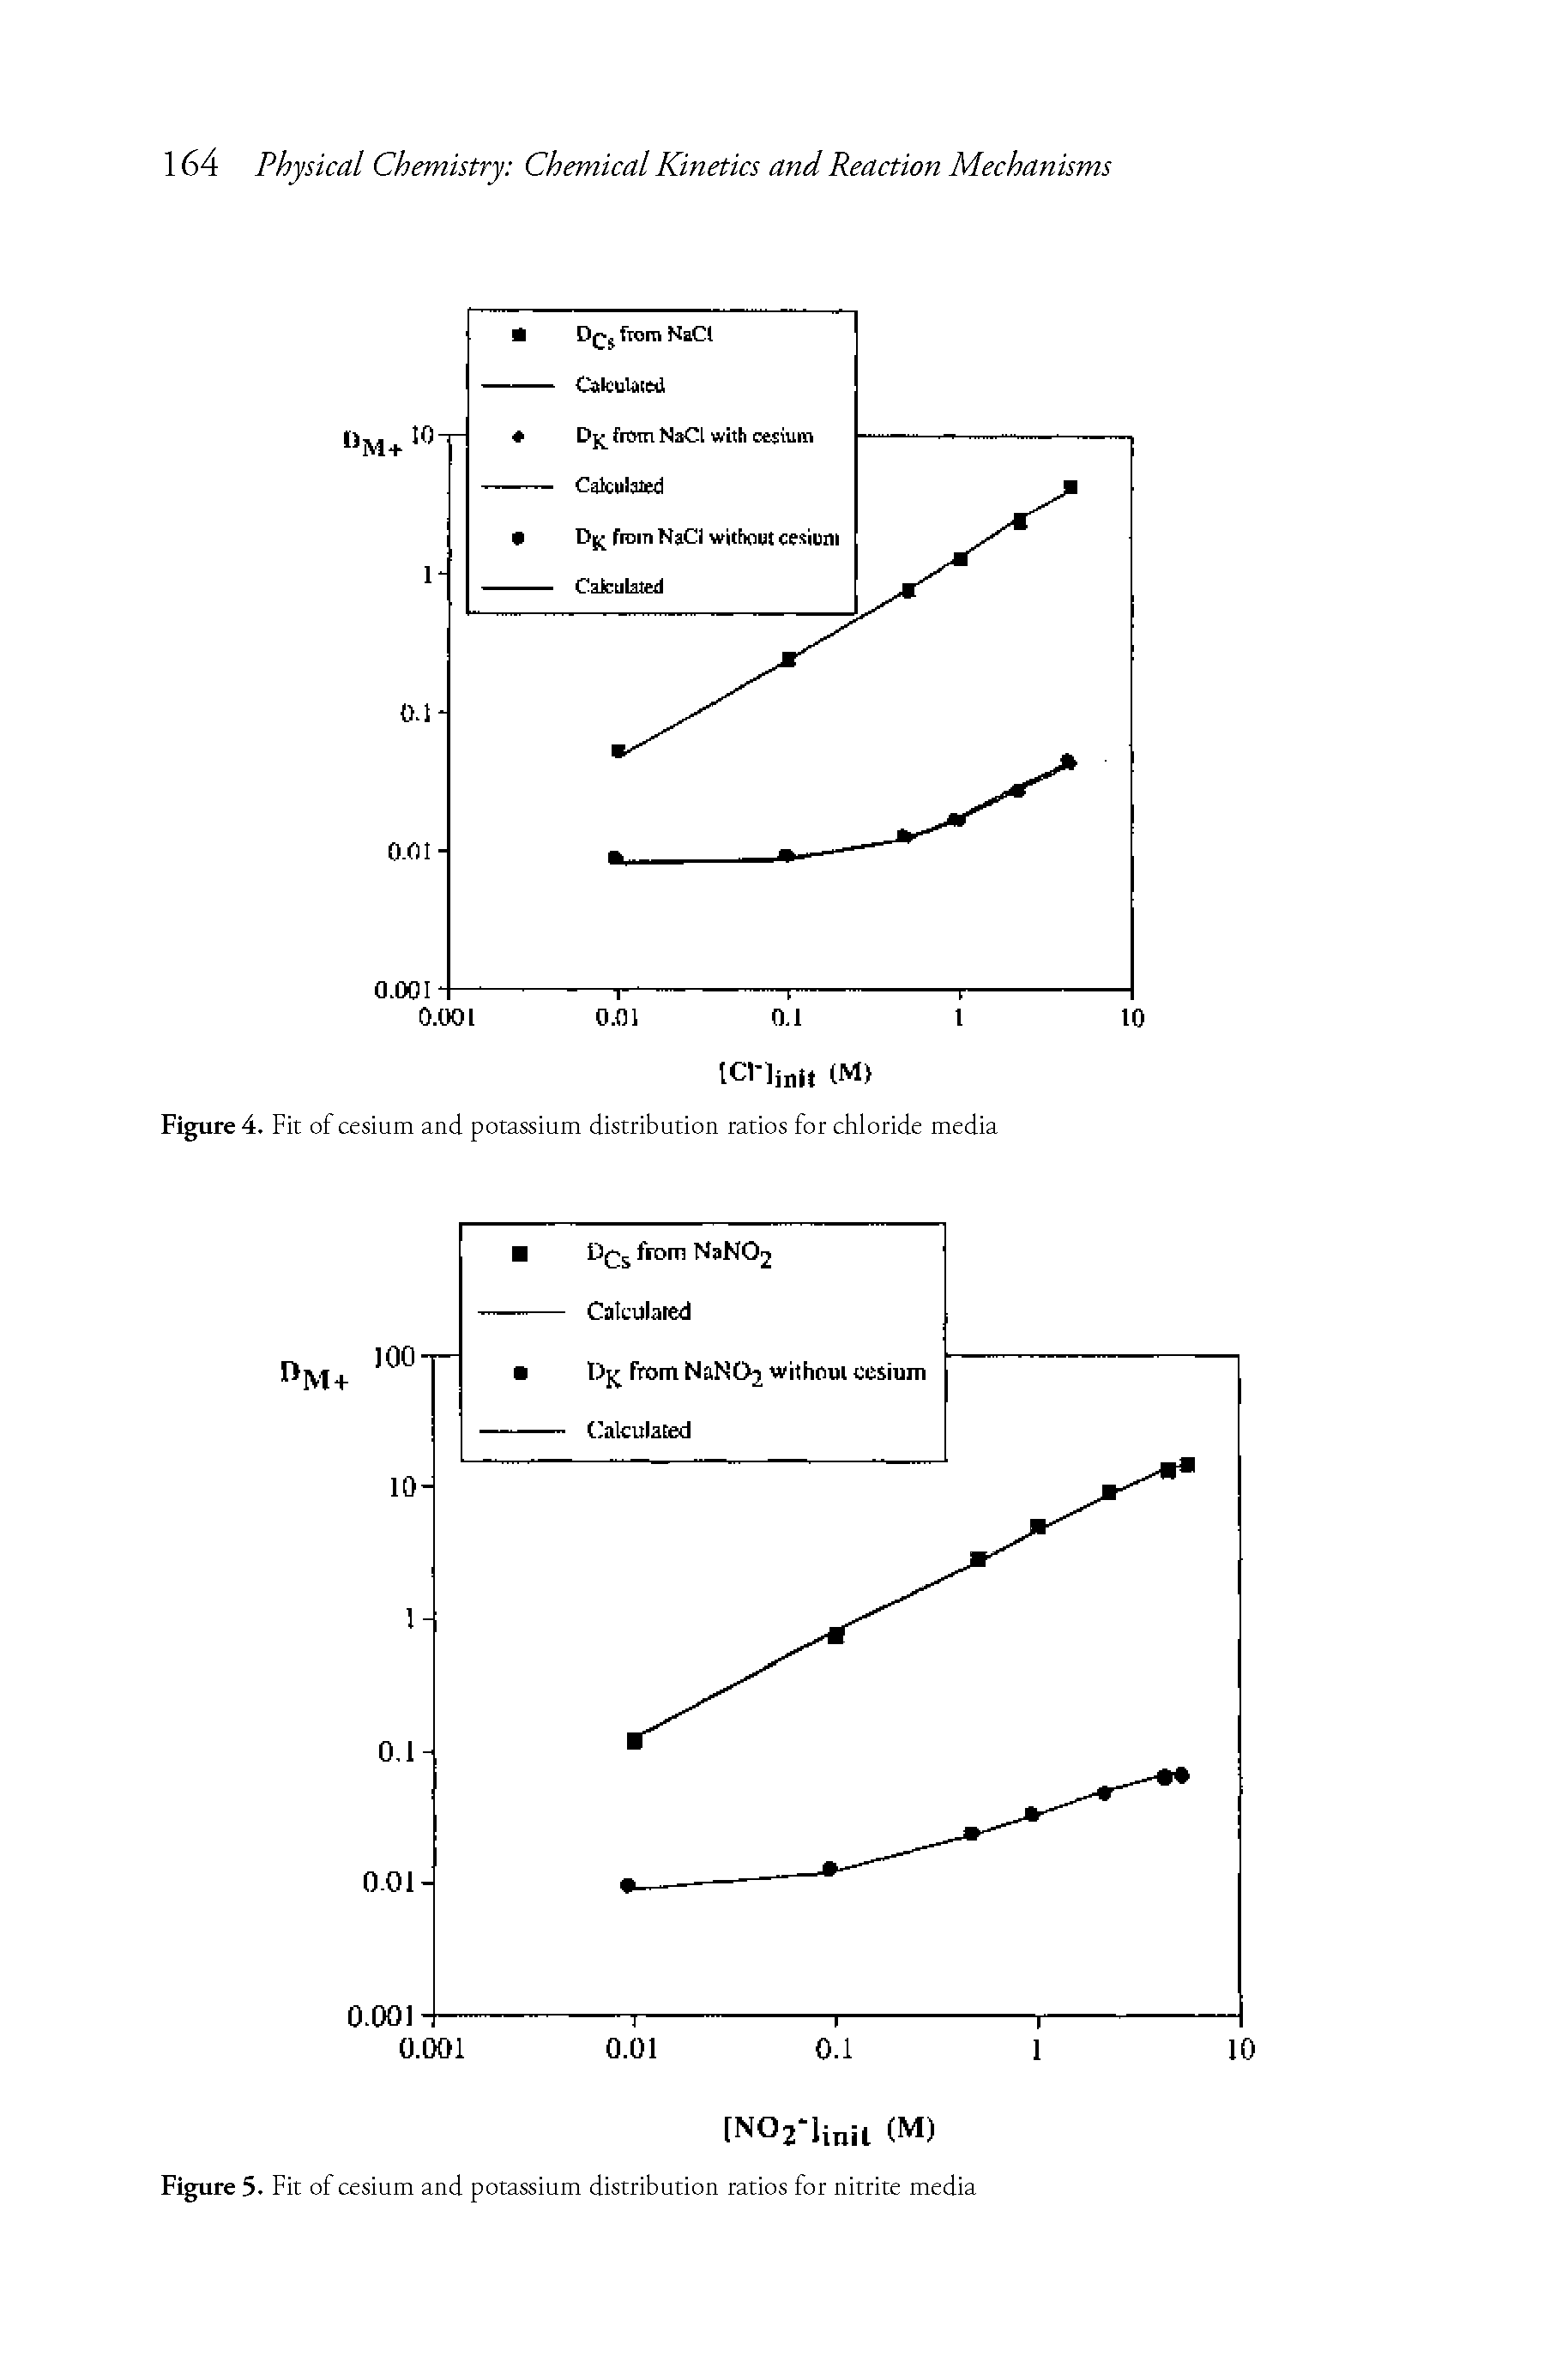 Figure 4. Fit of cesium and potassium distribution ratios for chloride media...